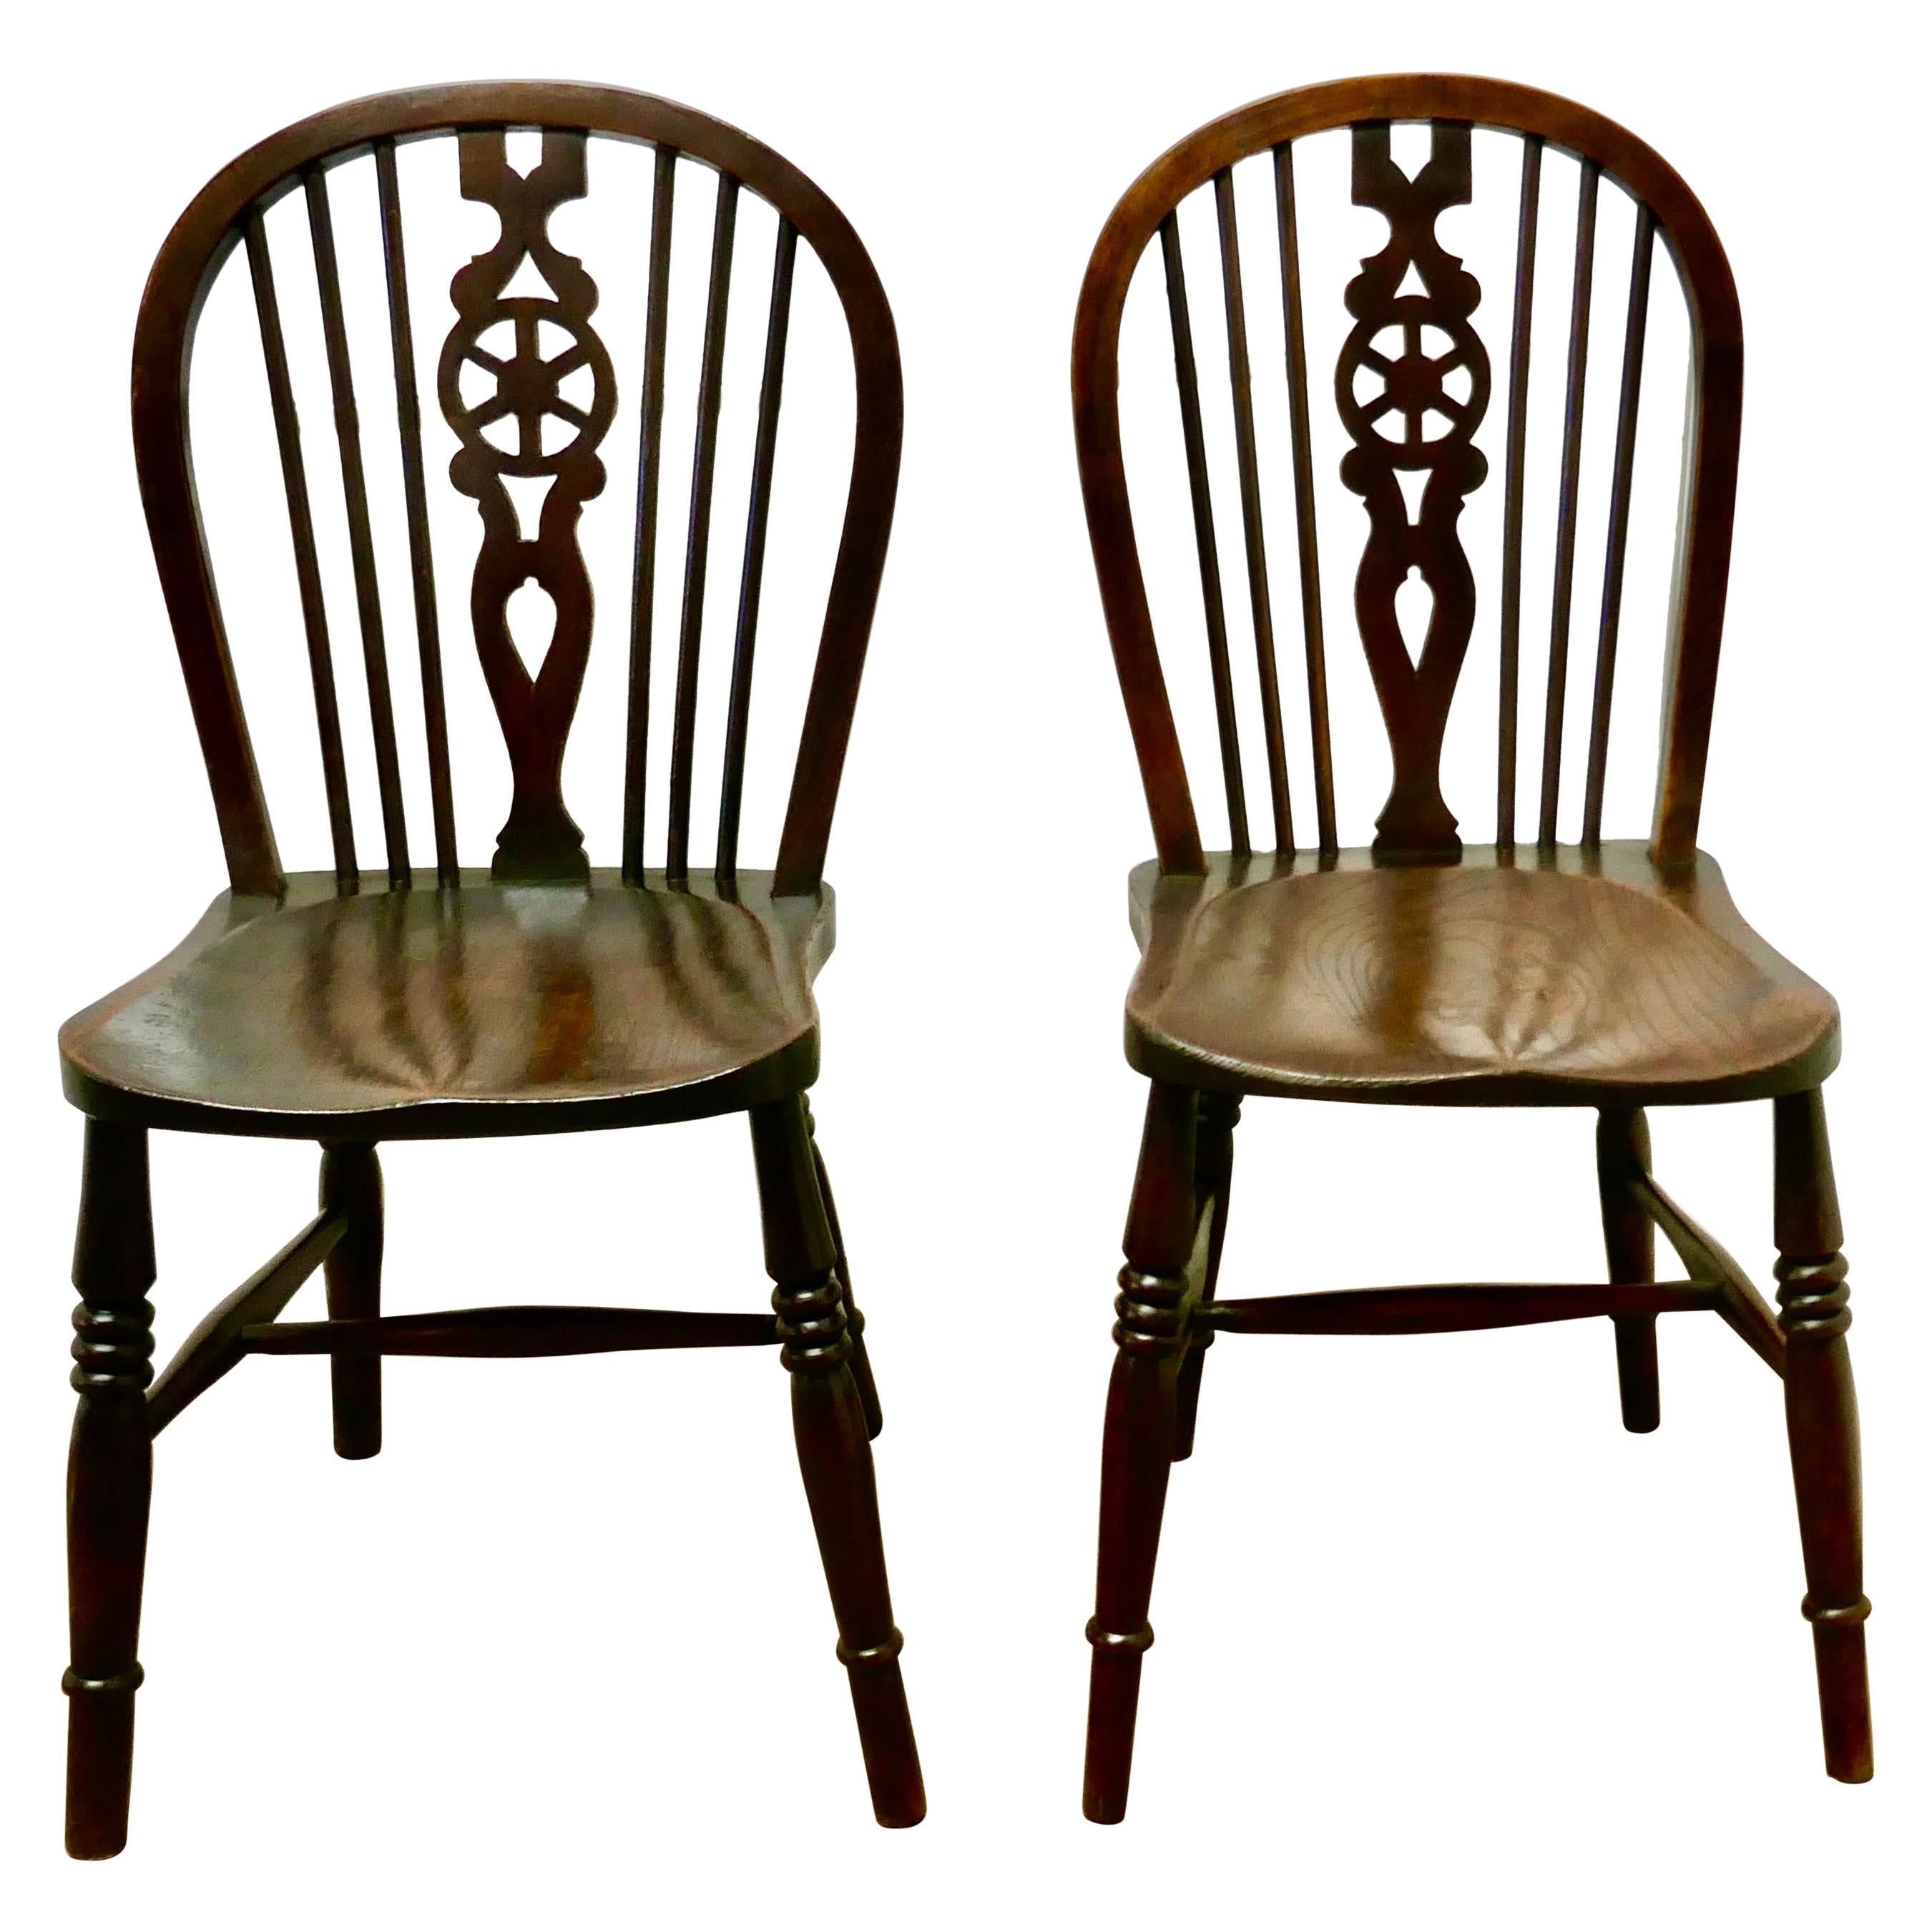 Pair of Victorian Beech and Elm Wheel Back Chairs